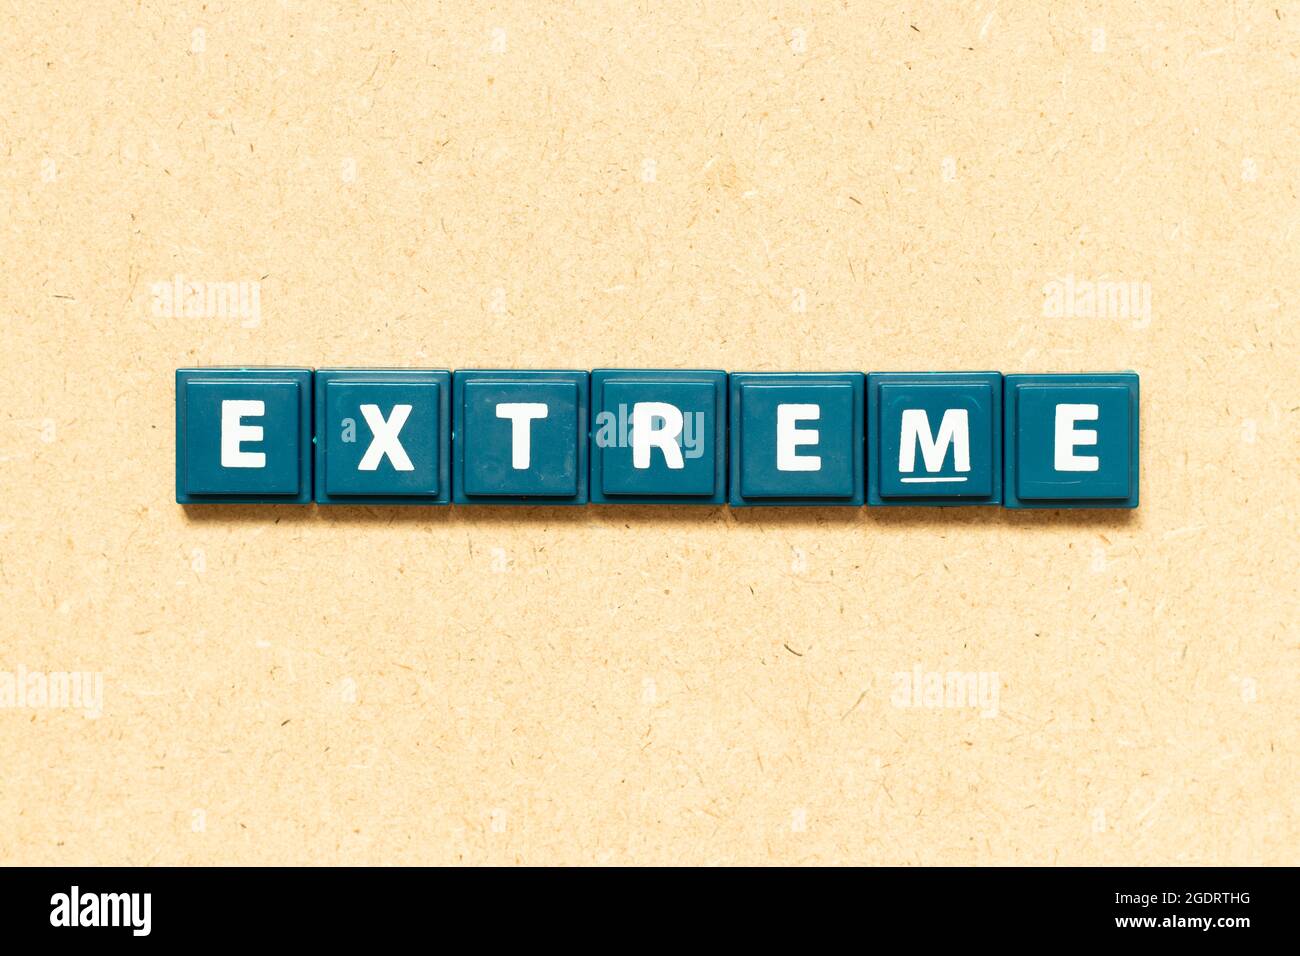 Tile alphabet letter in word extreme on wood background Stock Photo